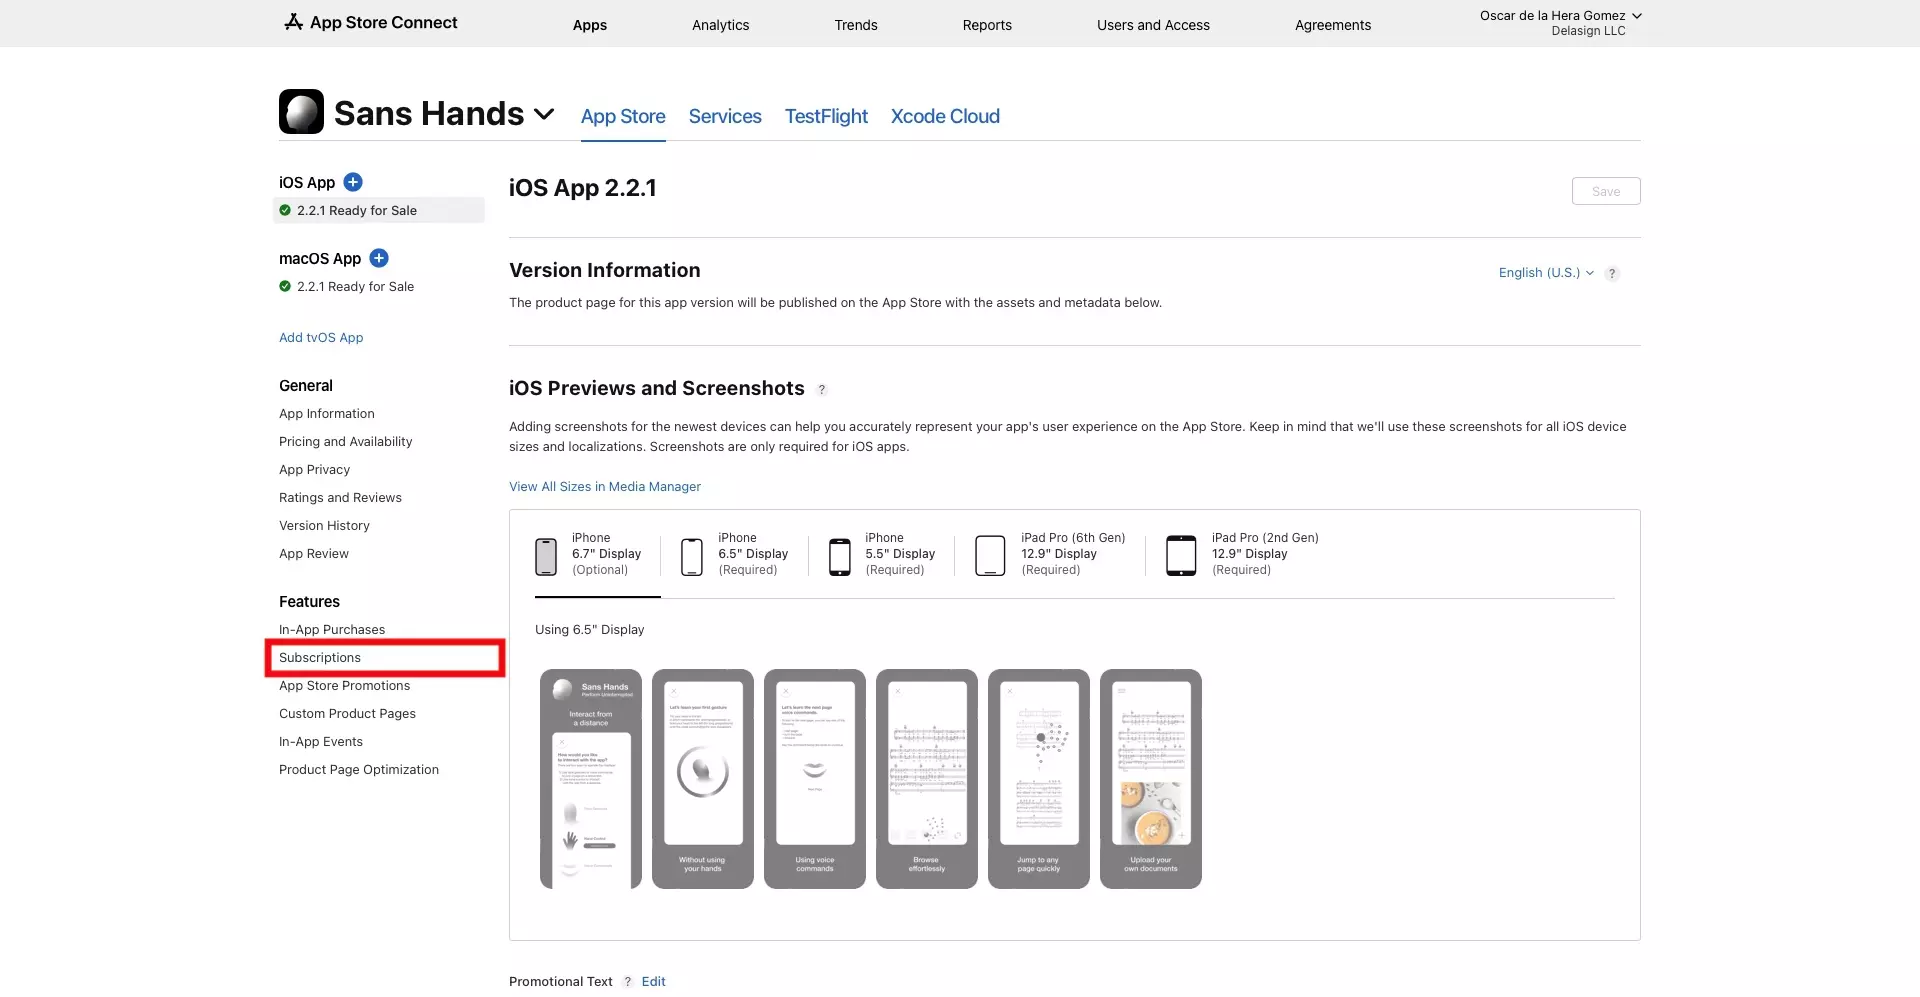 A screenshot of App Store Connect on an App Landing Page. Highlighted on the left menu side bar, under features, is "Subscription" click this tab to open the Subscriptions for the app.